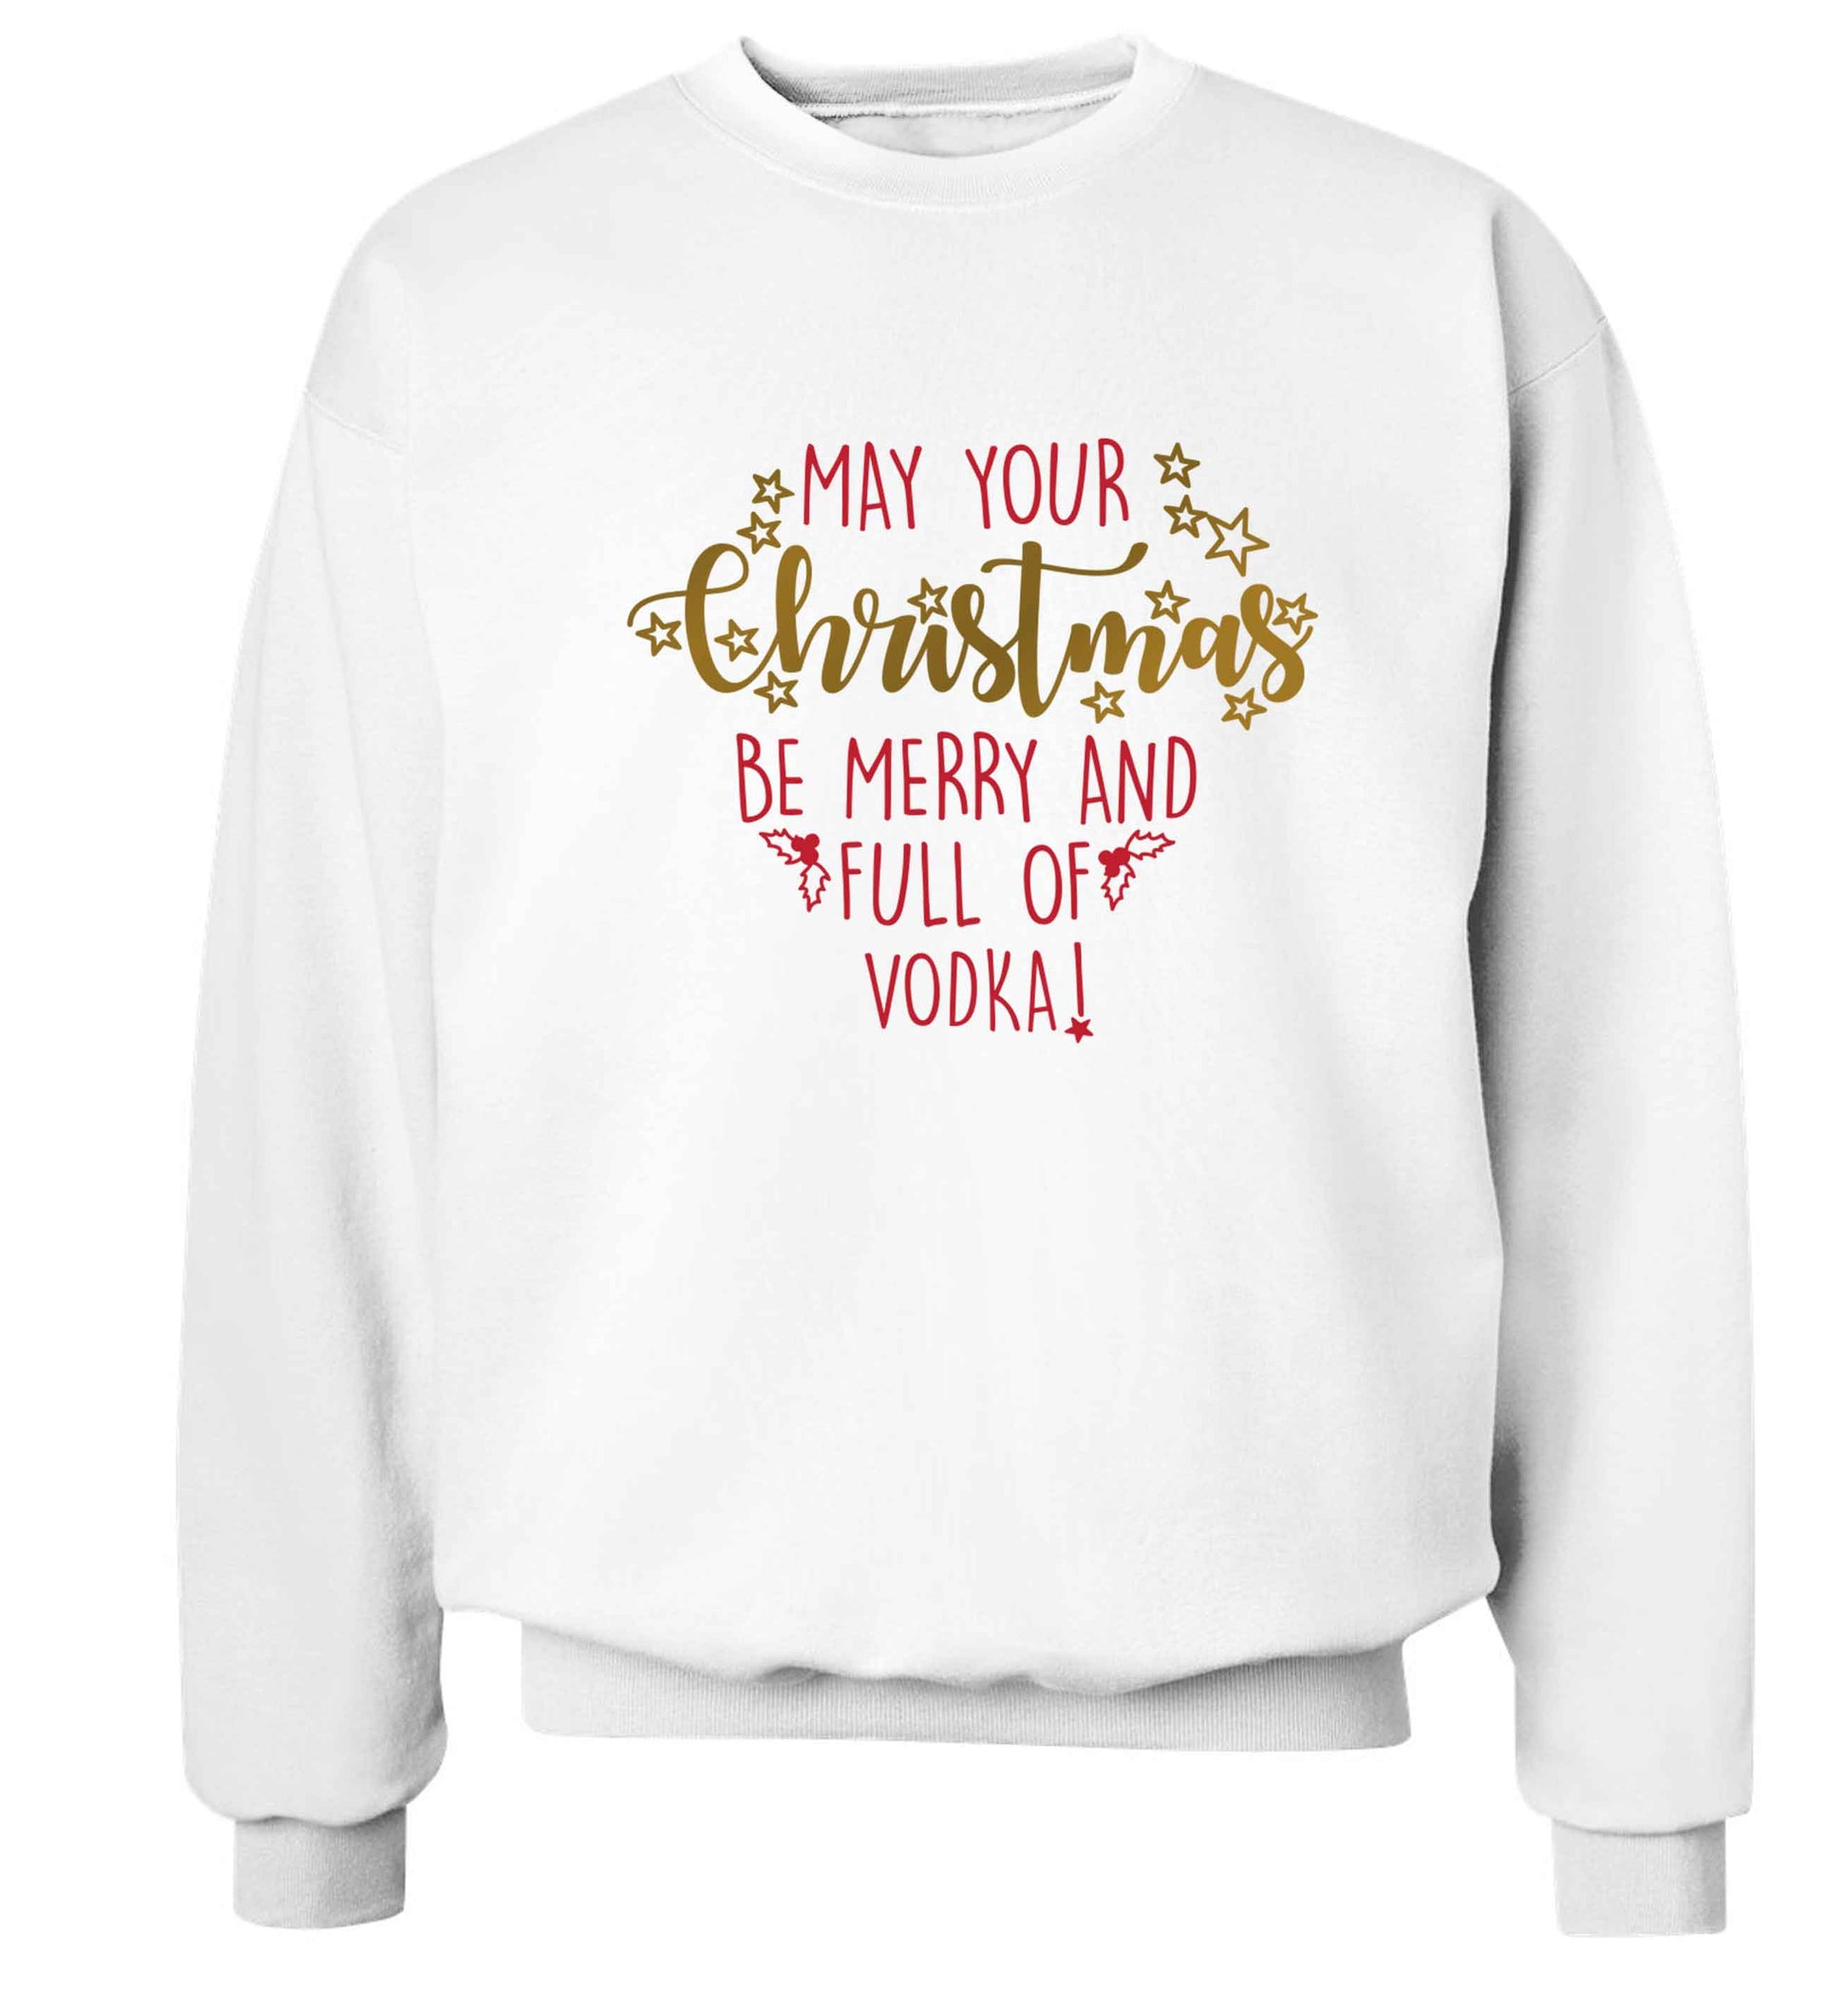 May your Christmas be merry and full of vodka Adult's unisex white Sweater 2XL